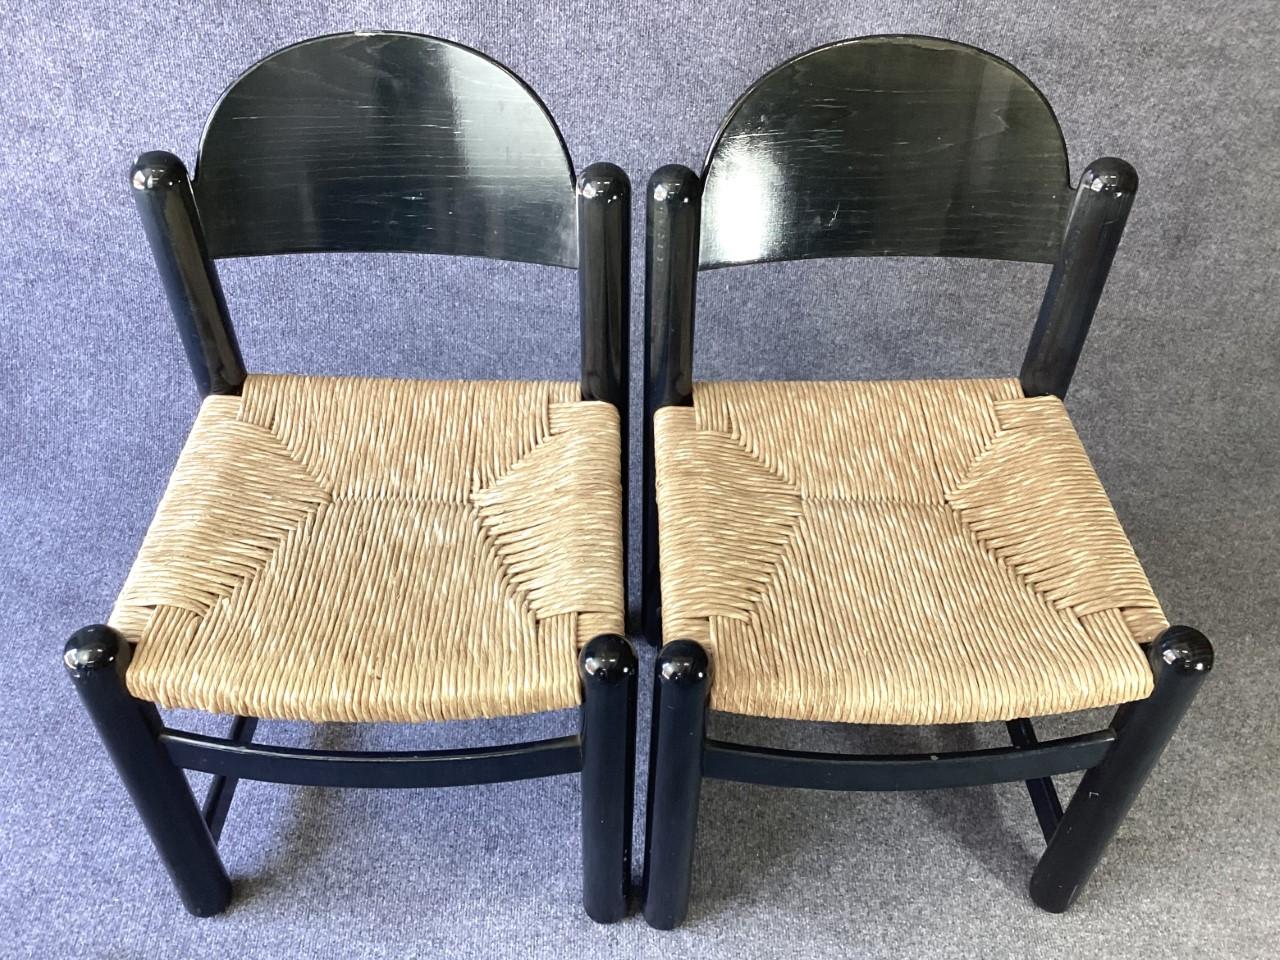 Papercord Vico Magistretti Attributed Vintage Italian Beach Side Chairs Paper Cord Seats